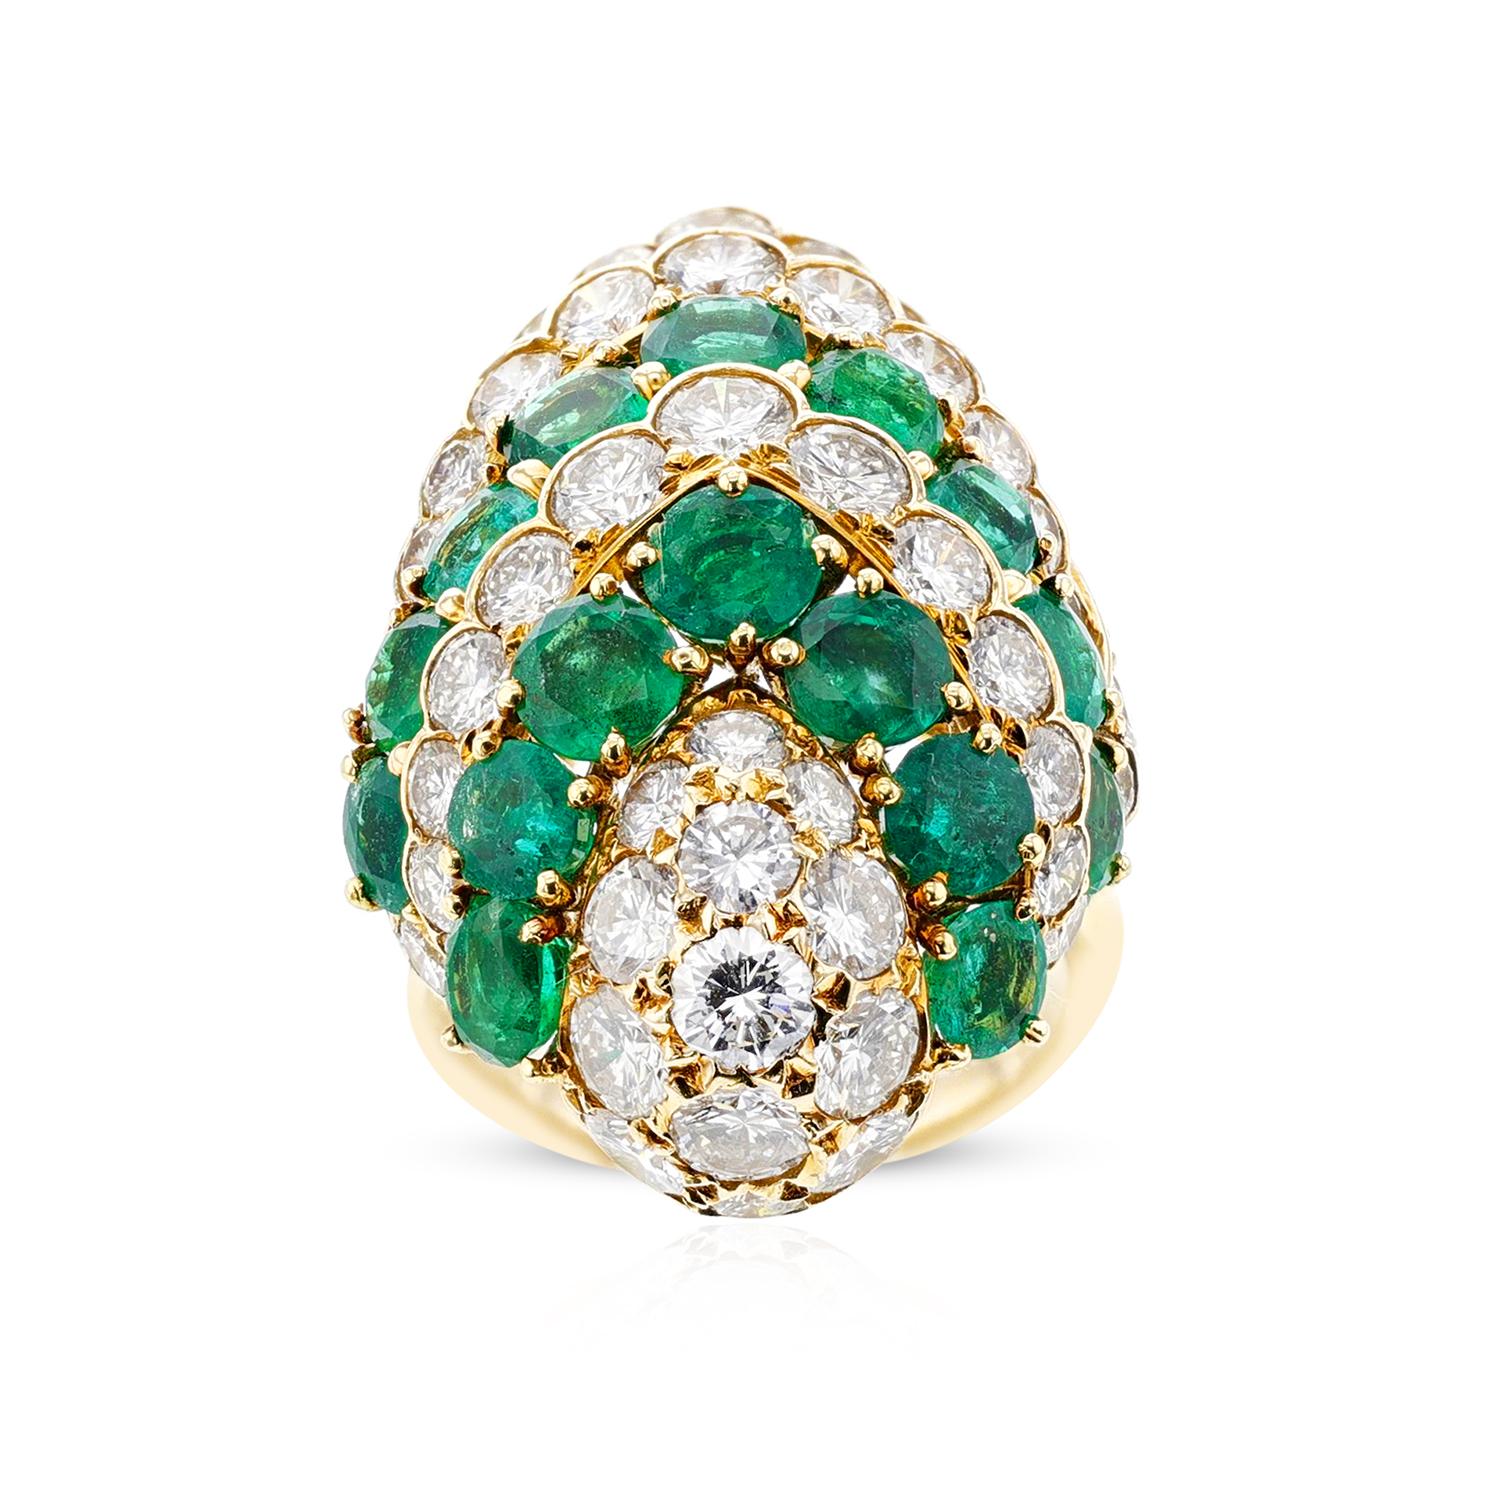 Bvlgari Emerald and Diamond Cocktail Ring, 18 Karat In Excellent Condition For Sale In New York, NY